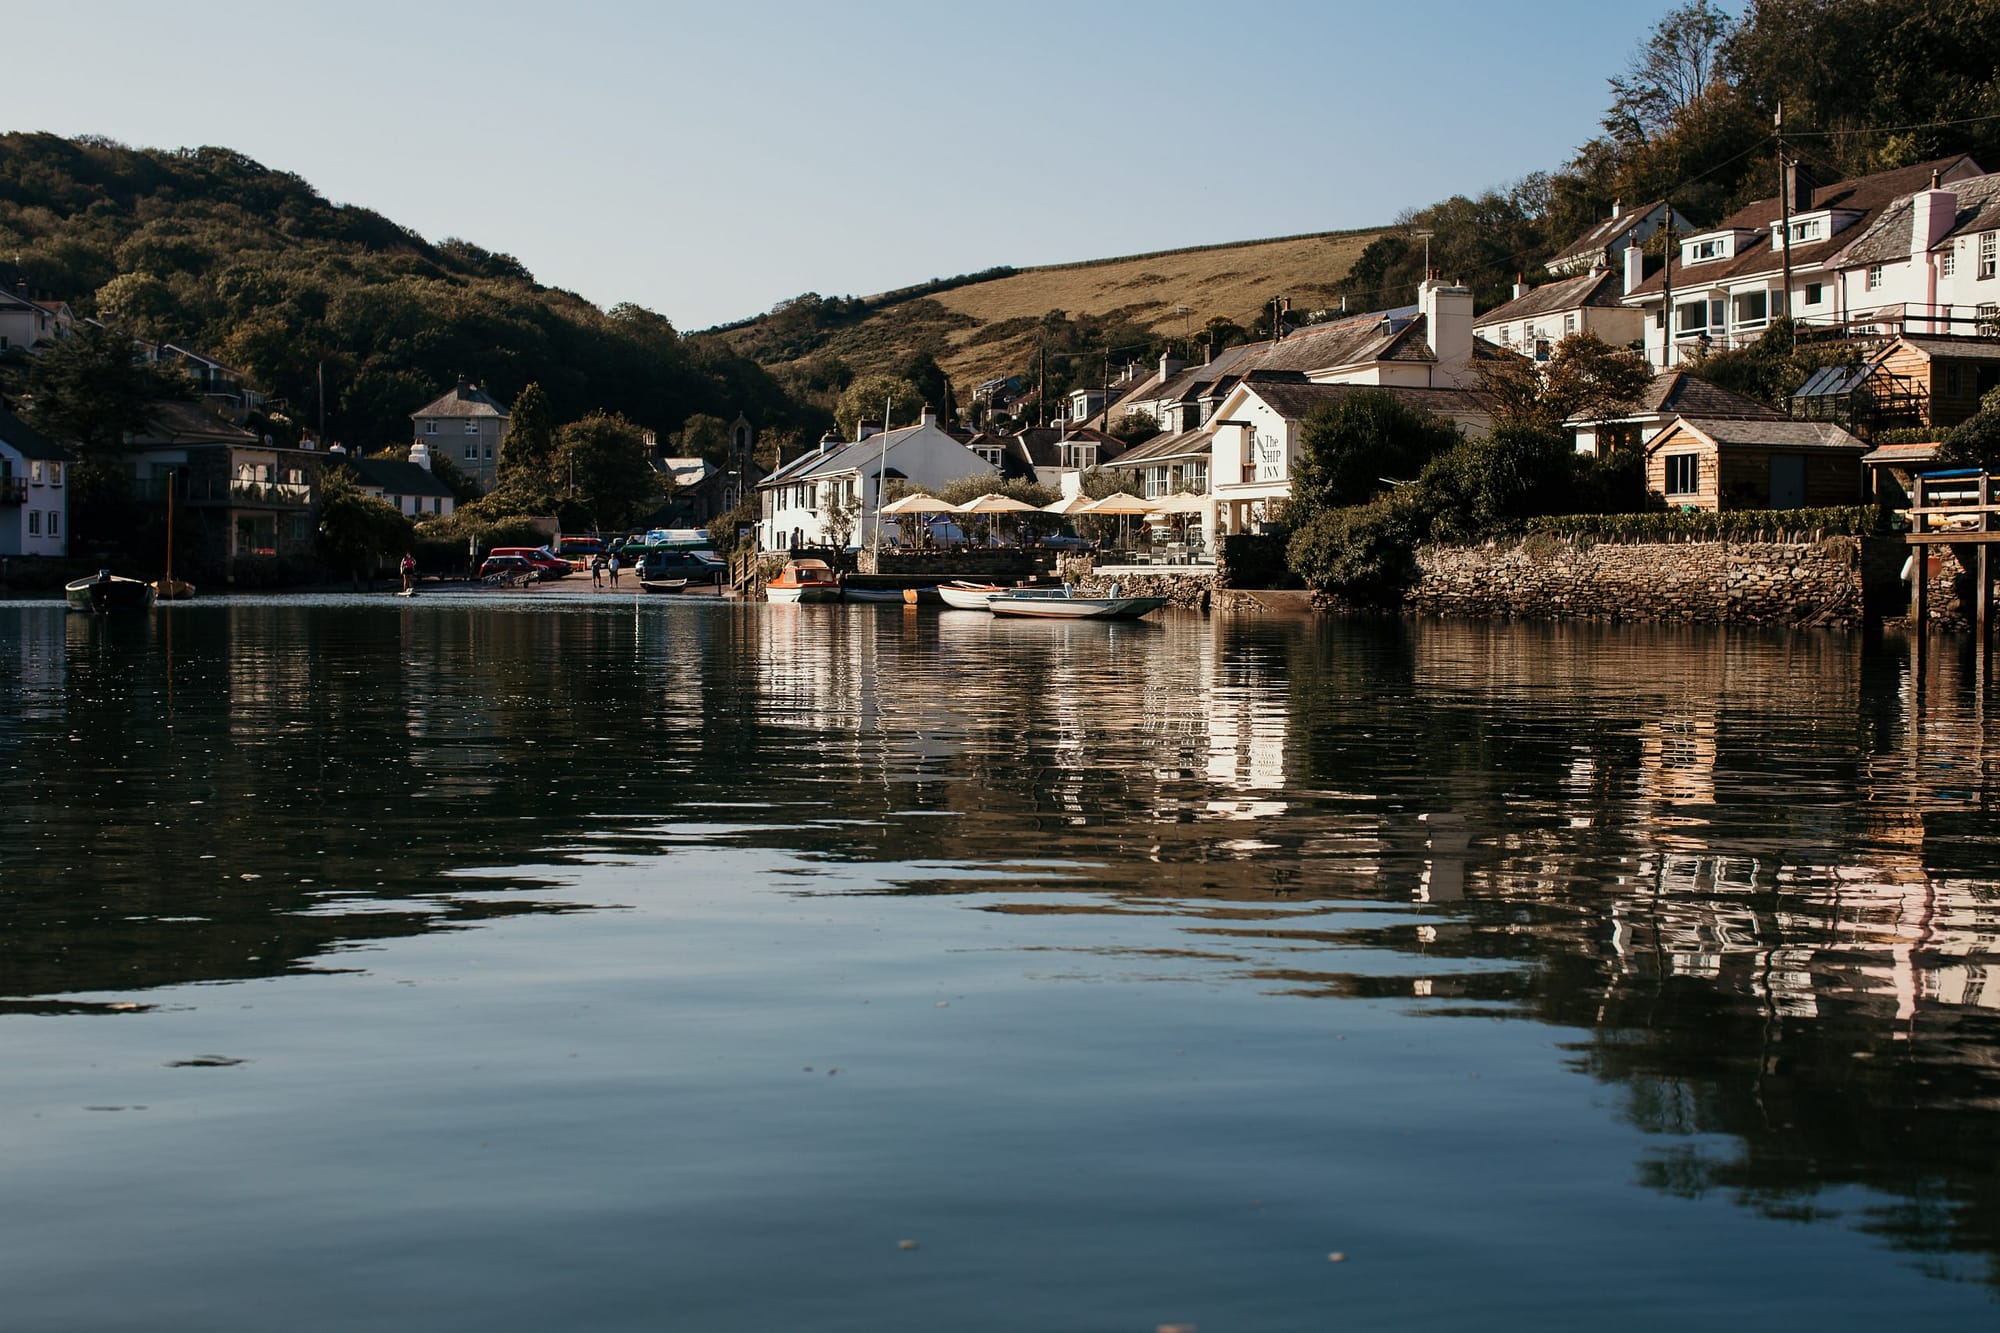 Free Parking - Anchor Cottage - Holiday Cottages Noss Mayo